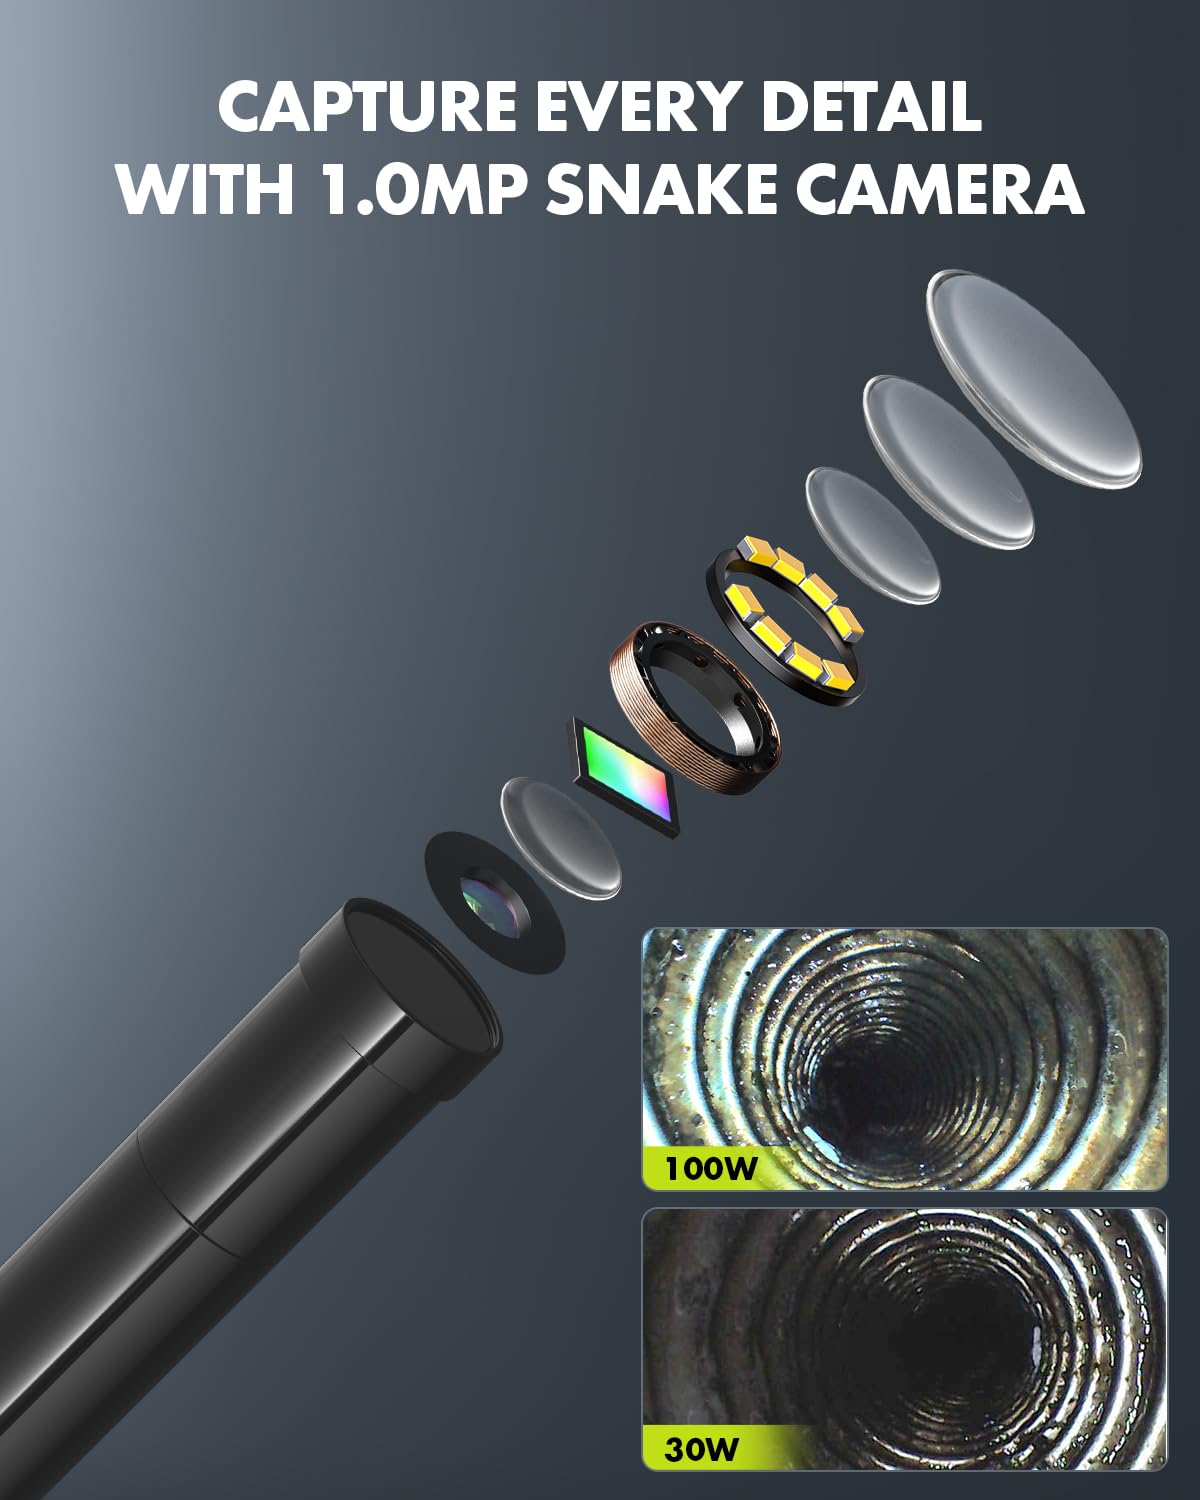 Endoscope Camera with Light, 1080P 1.0MP Borescope with 8 LED Lights, USB Endoscope with 3.3ft Semi-Rigid Snake Camera, IP67 Waterproof Inspection Camera for iPhone, iPad, OTG Android Phone